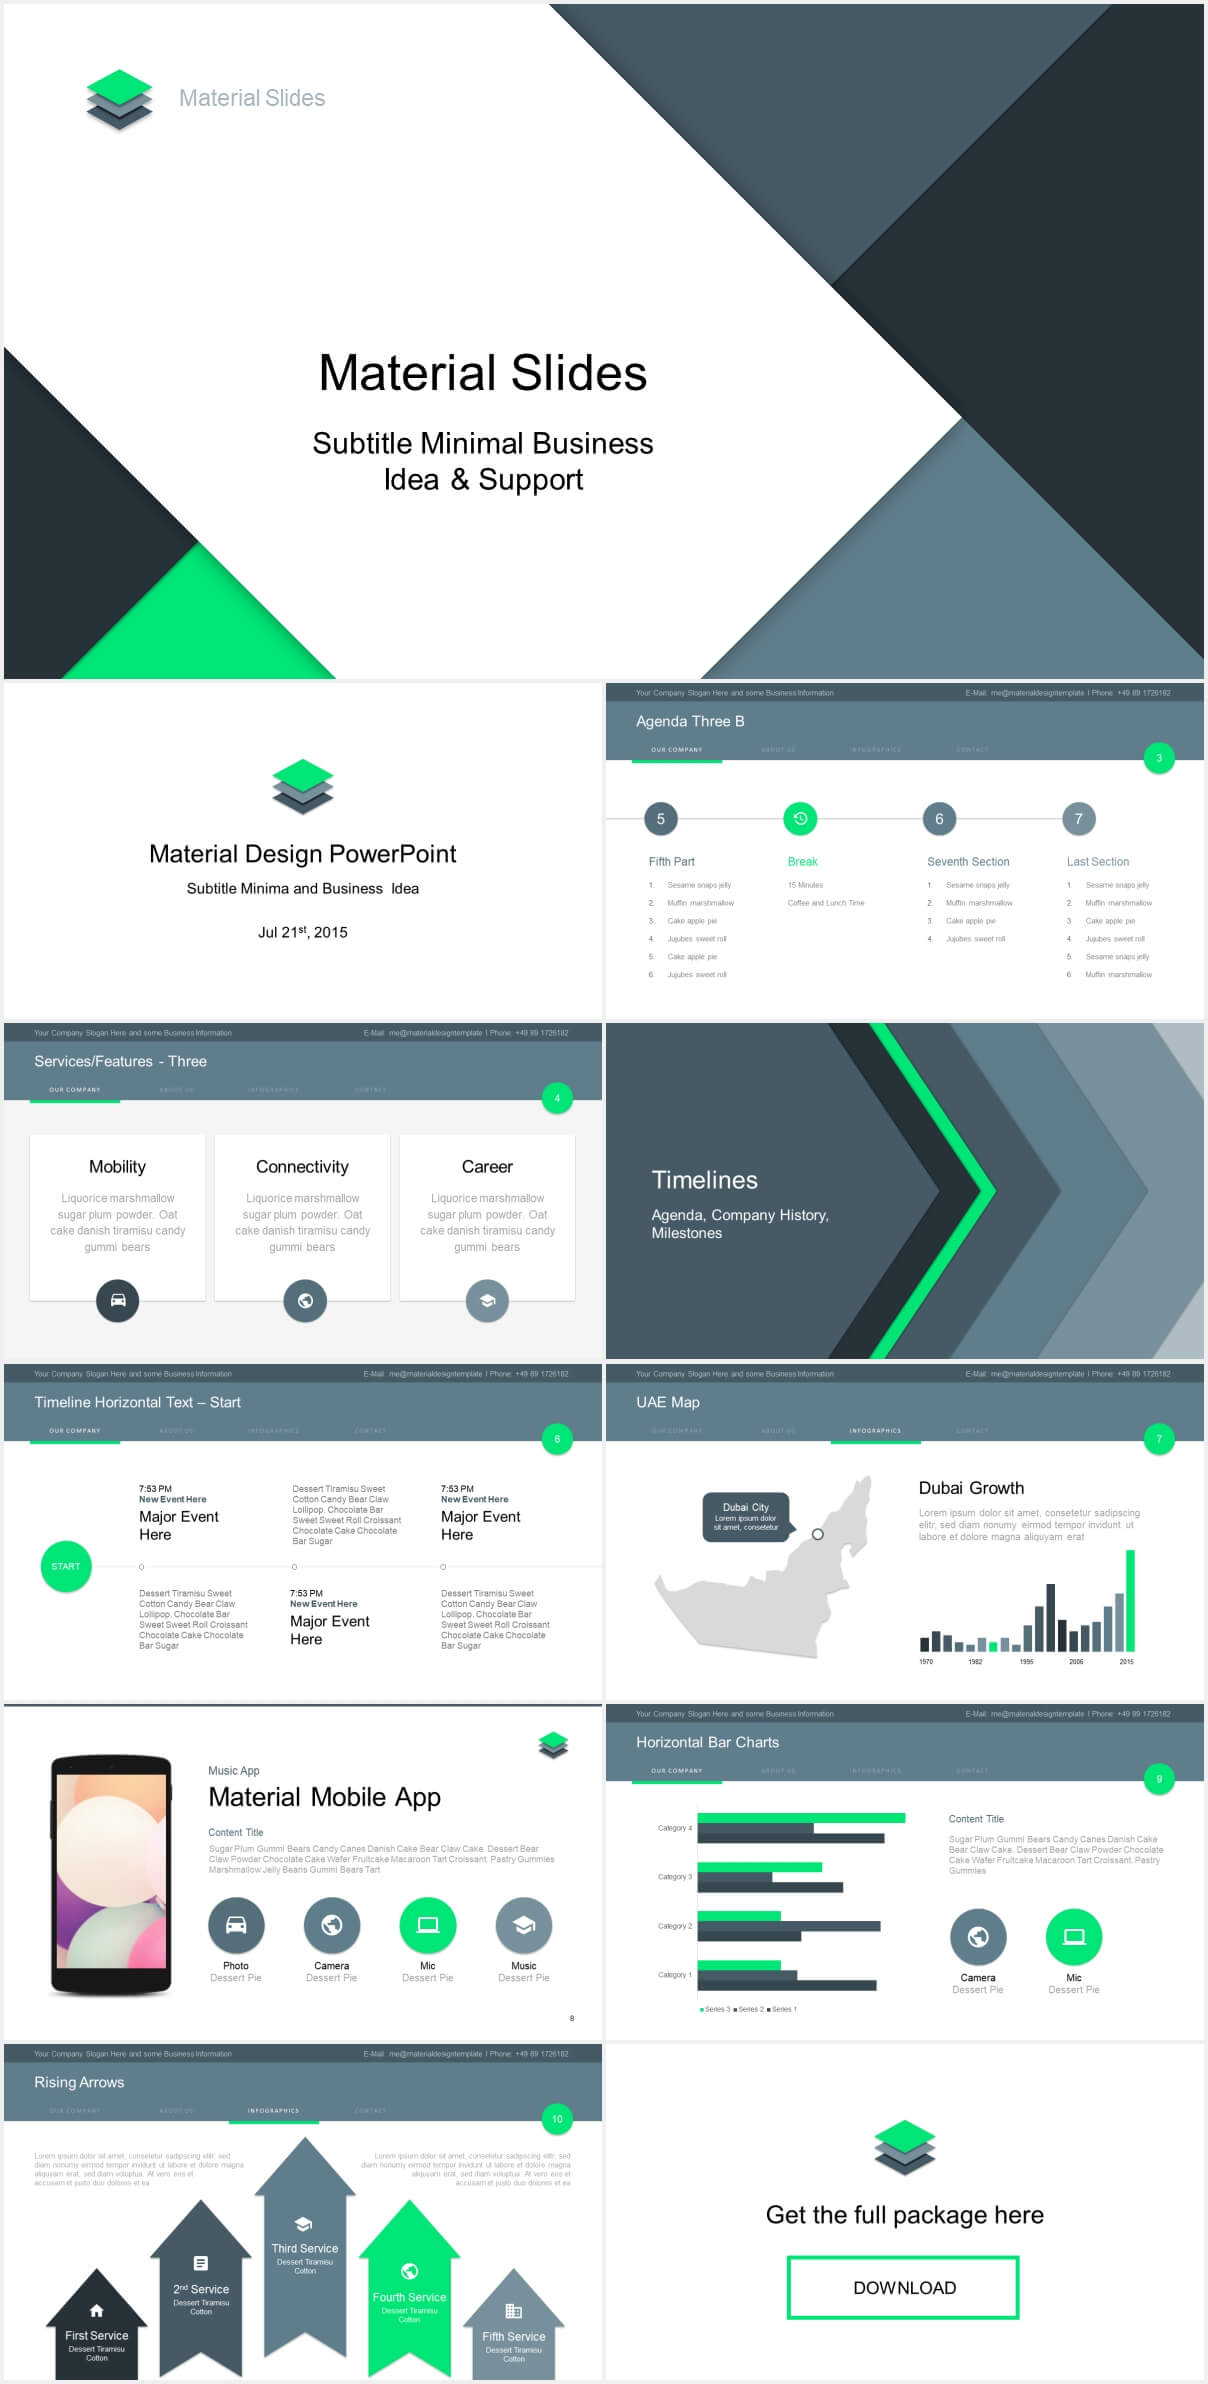 Material Design Powerpoint Template – Just Free Slides For Powerpoint Slides Design Templates For Free